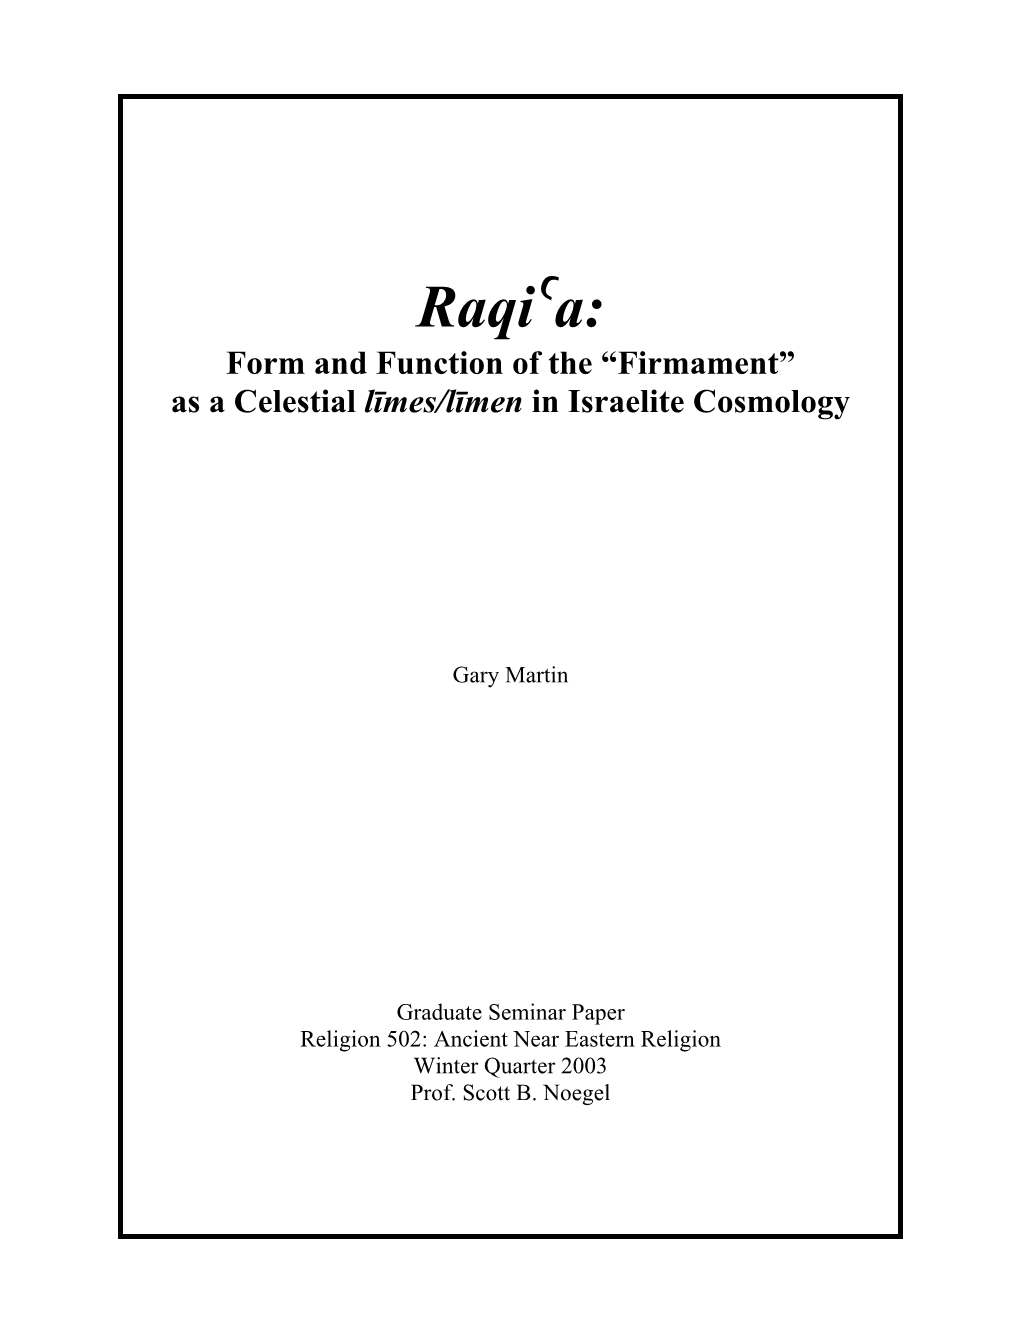 Raqi(A: Form and Function of the “Firmament” As a Celestial Līmes/Līmen in Israelite Cosmology